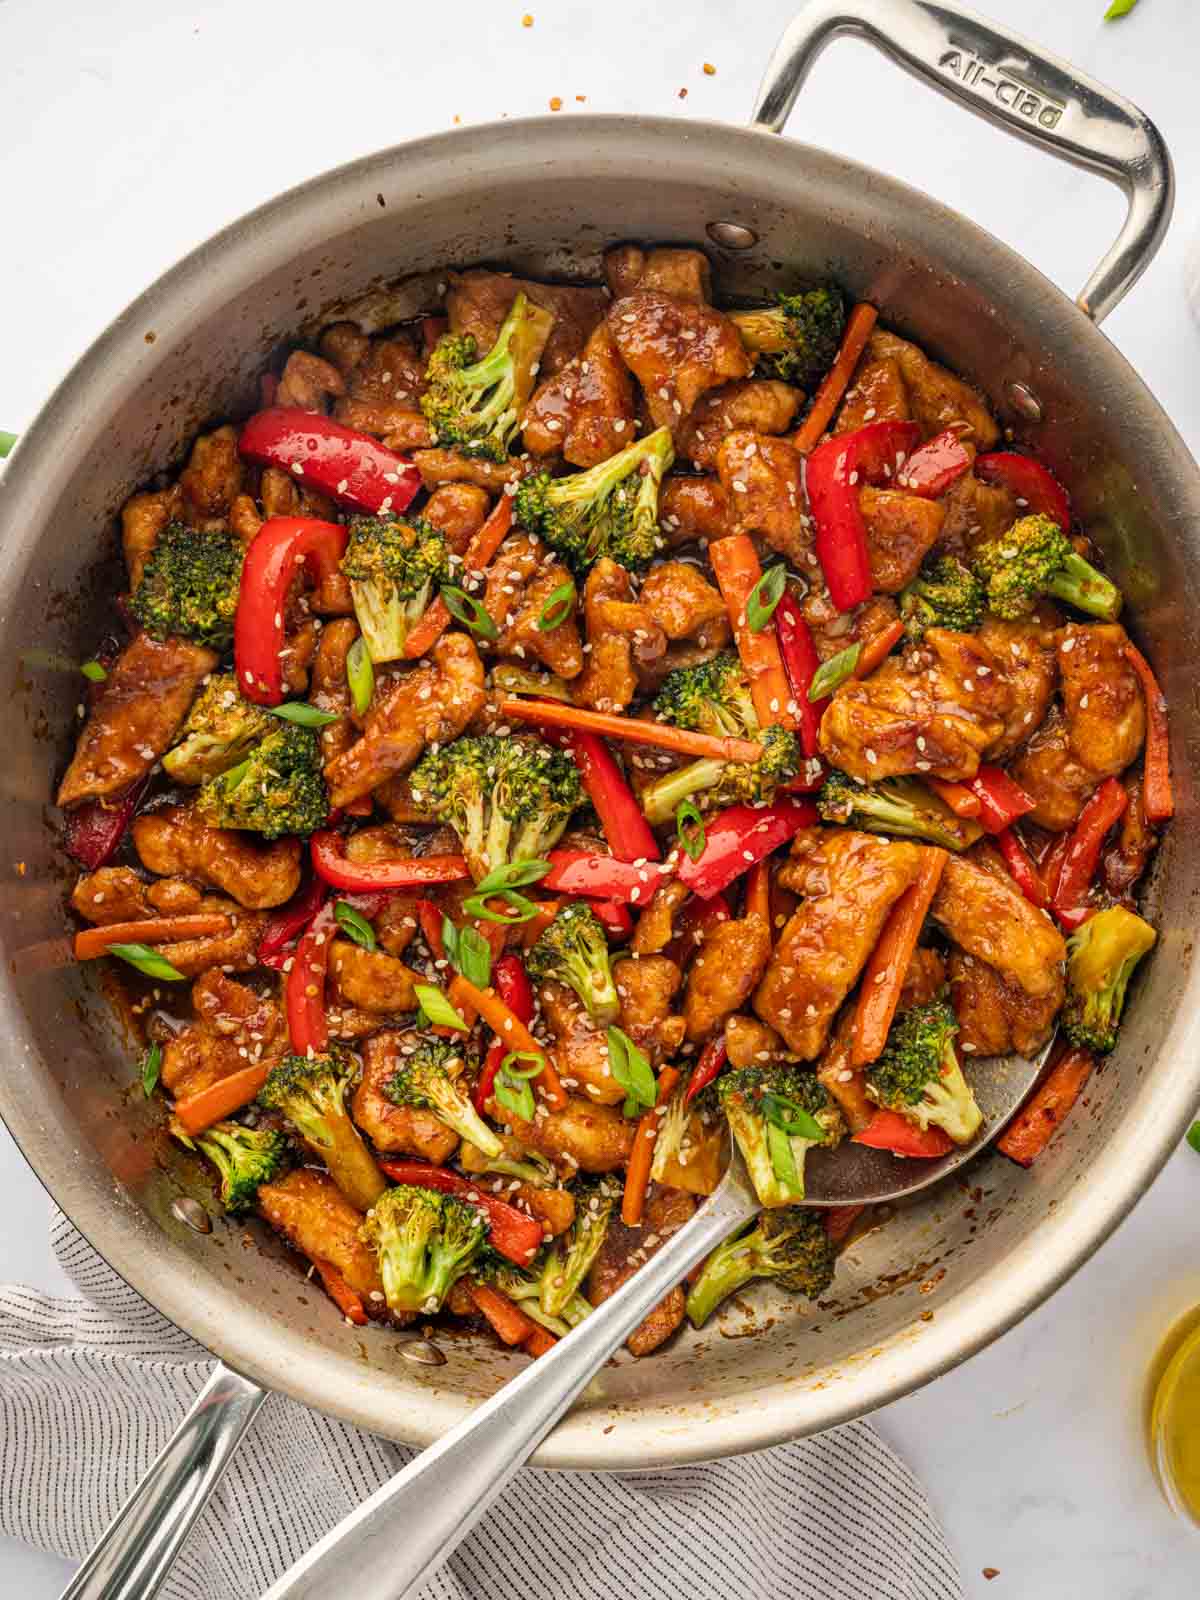 Hunan chicken recipe in a skillet with a spoon.